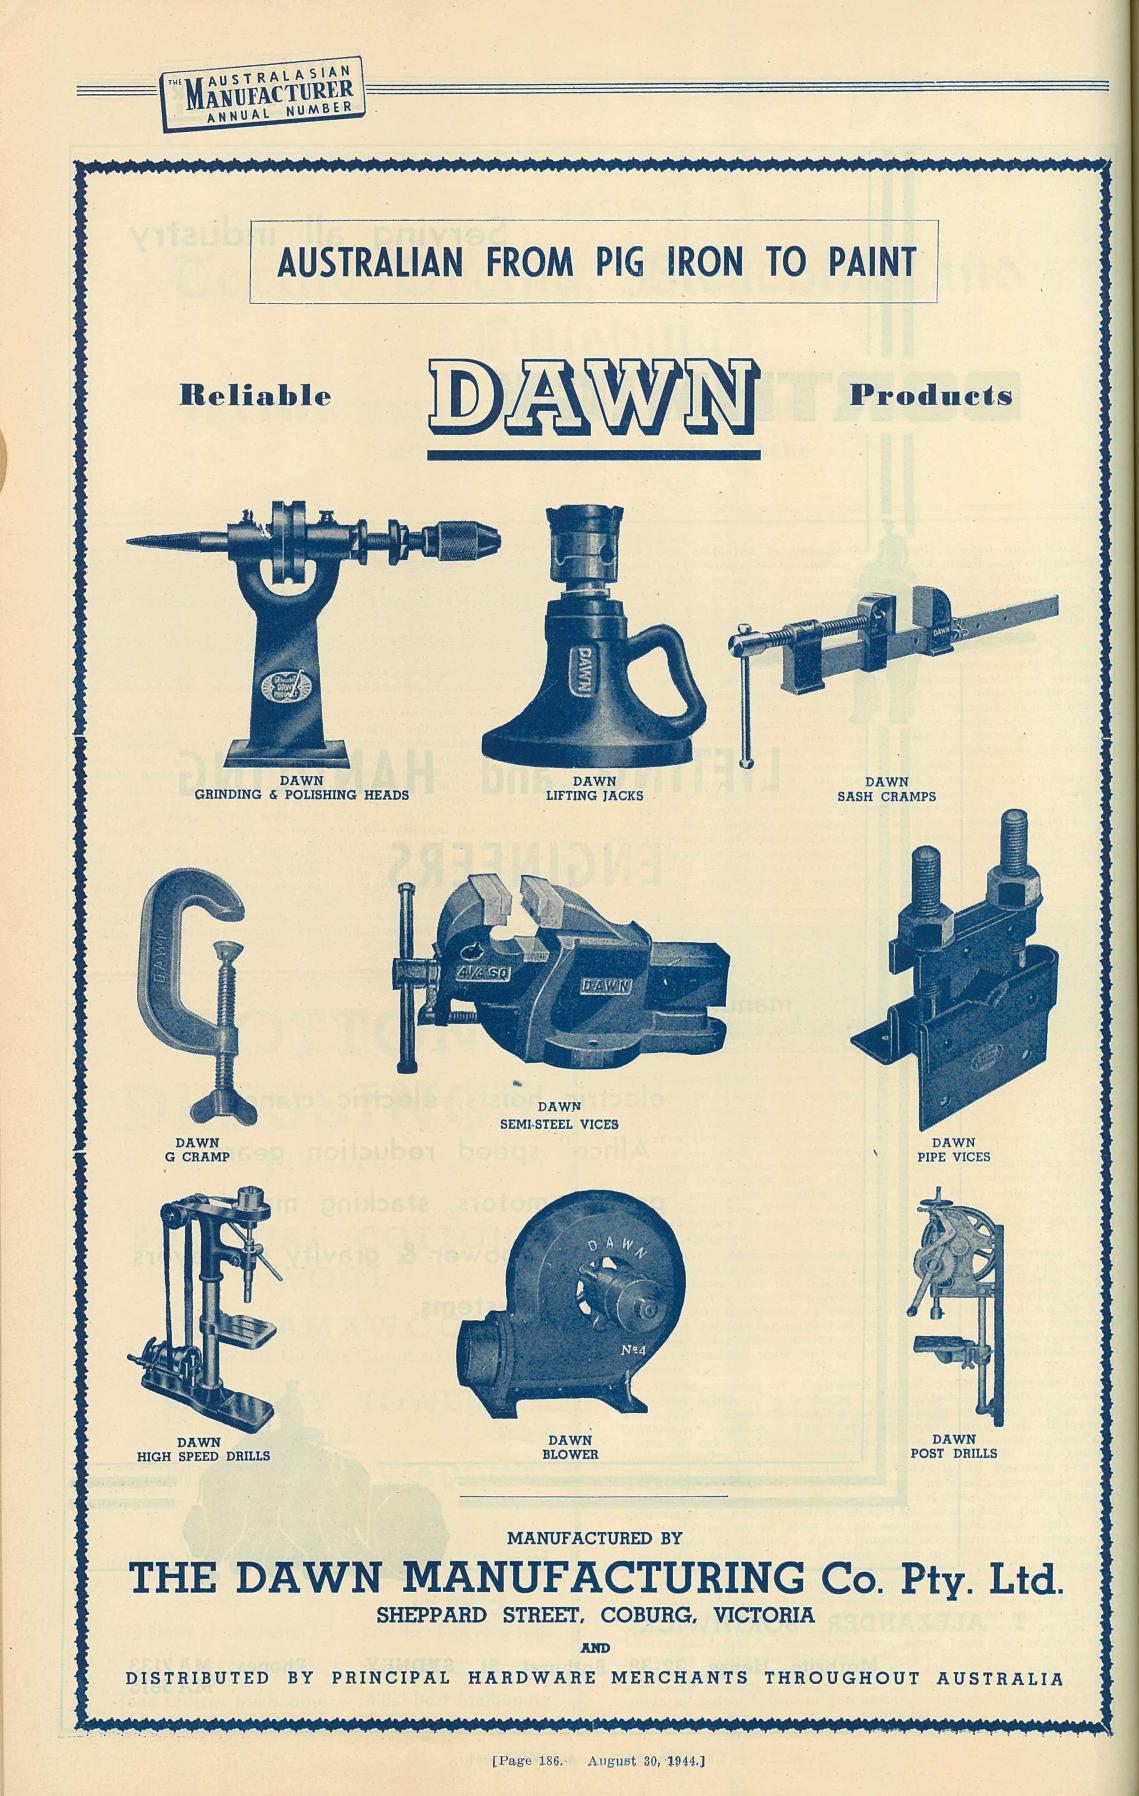 Here is a page from 1944 showing an ad for Dawn